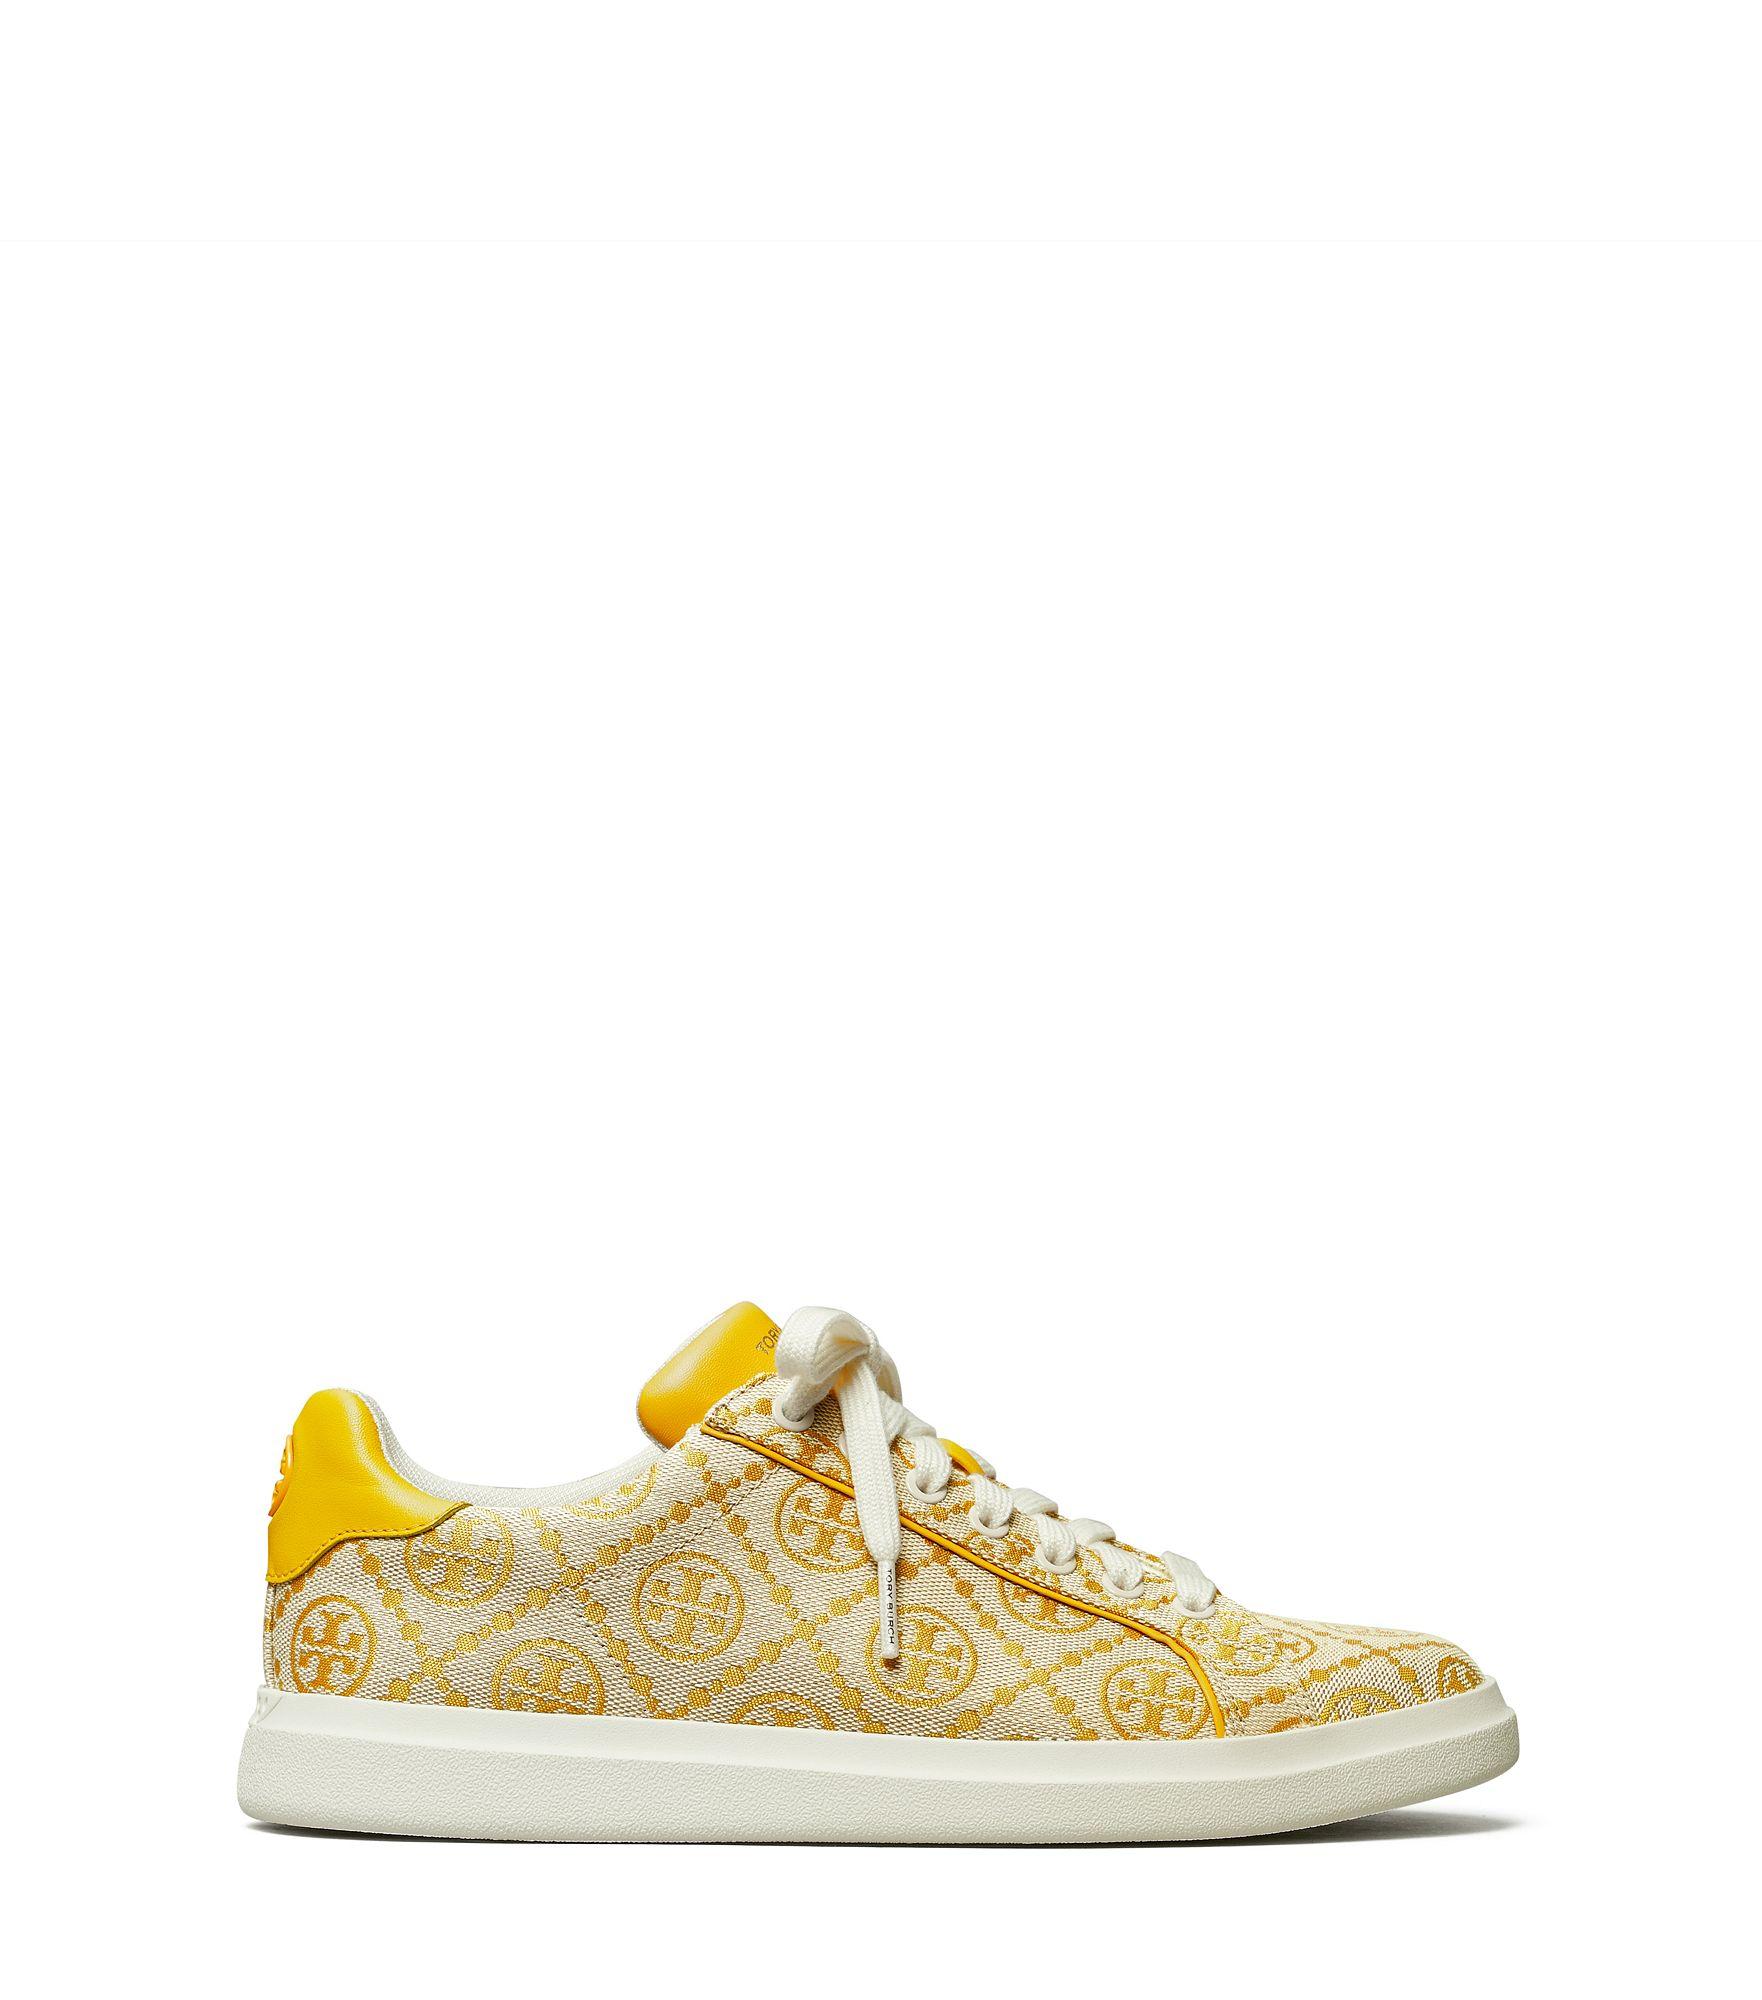 Tory Burch Leather Howell T Monogram Court Sneaker in Yellow - Lyst